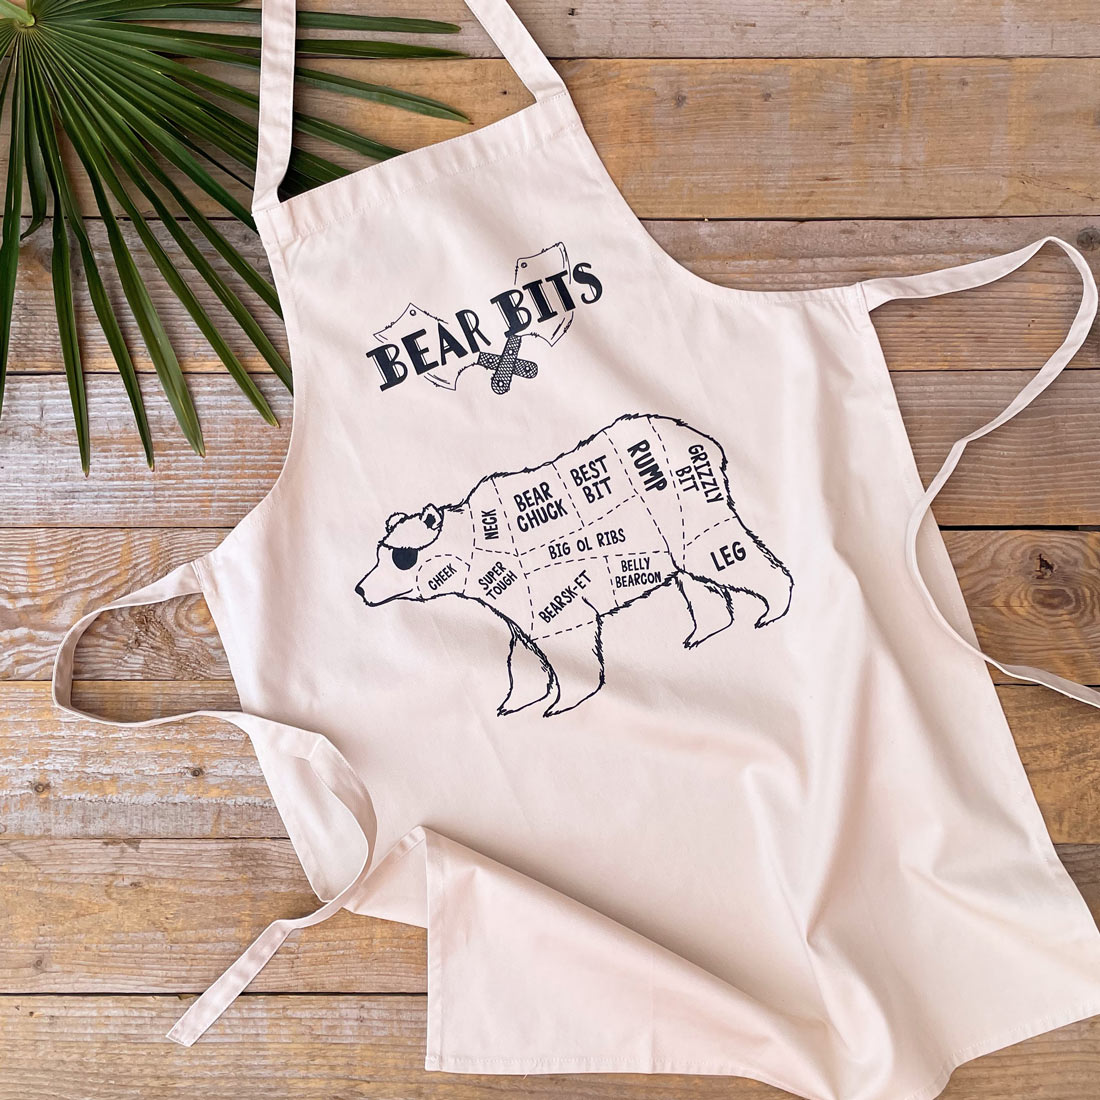 Apron with butcher chart for bears 